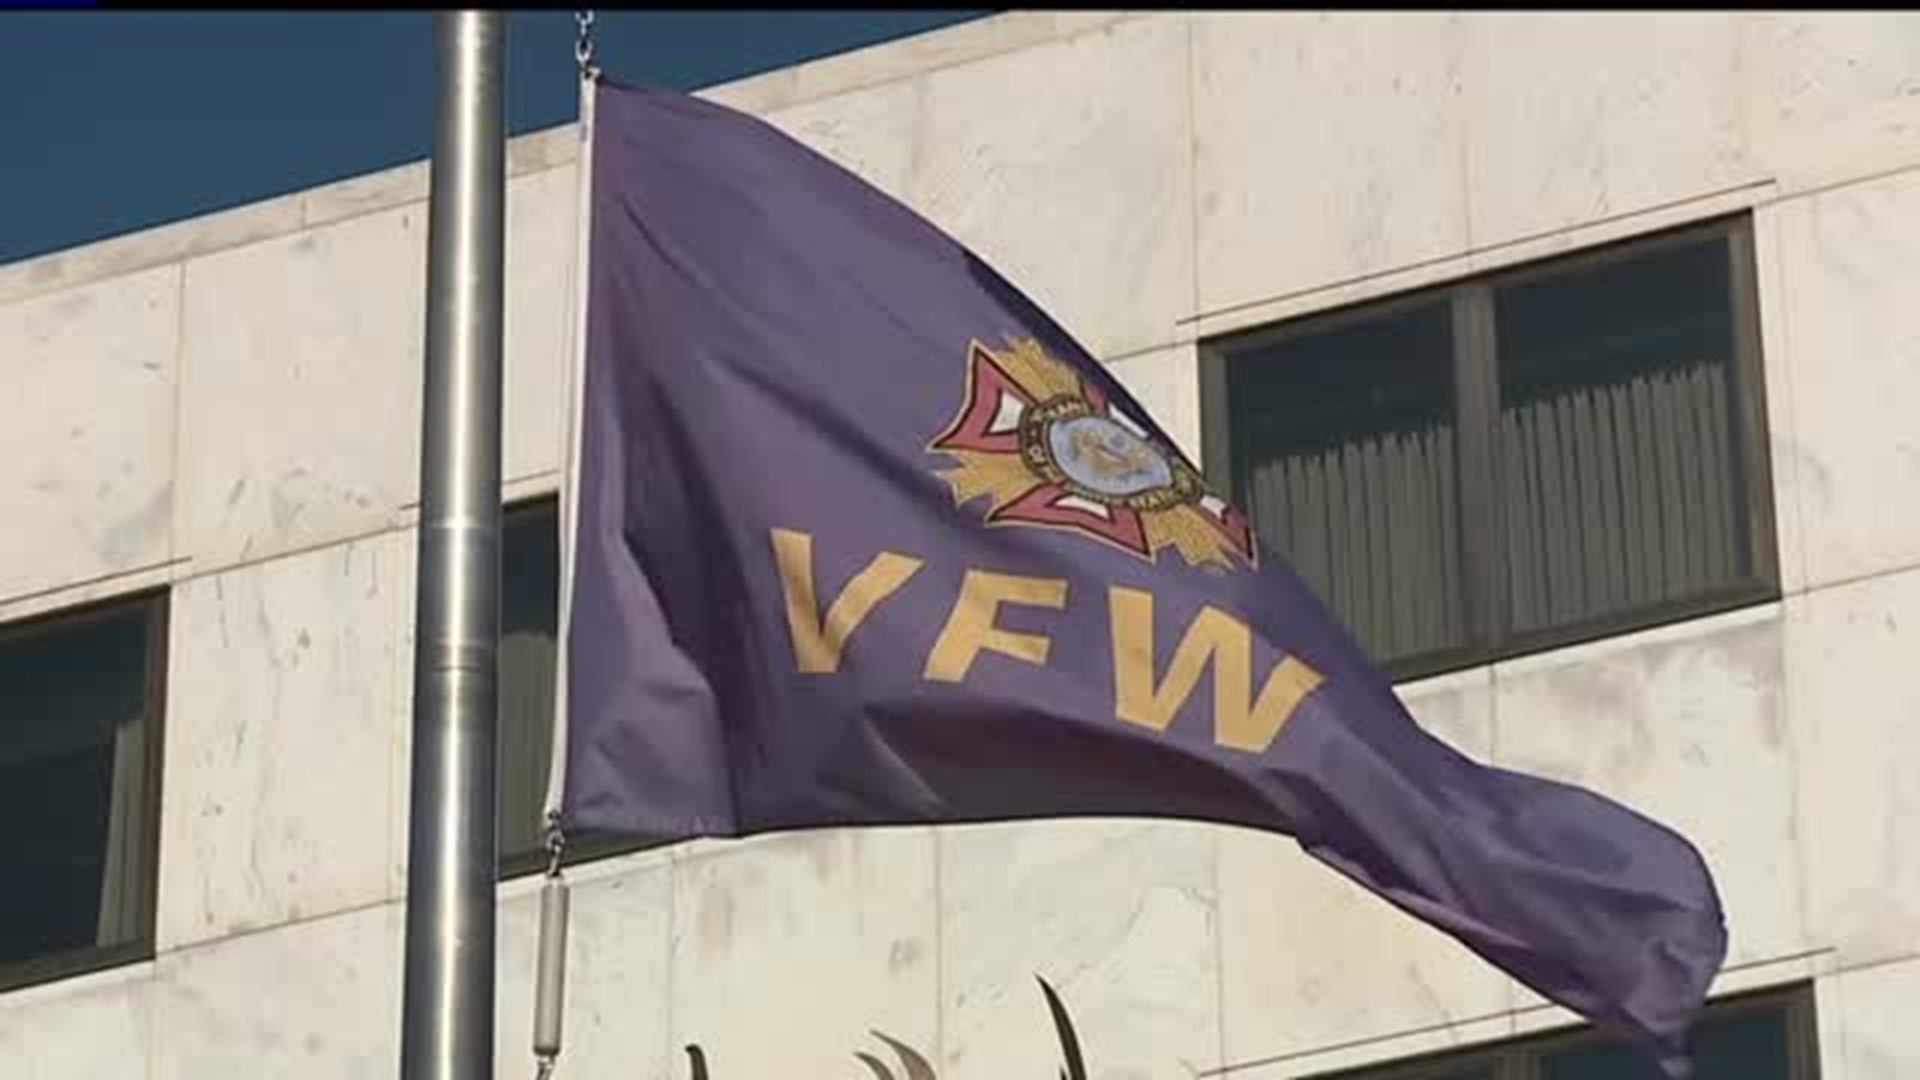 VFW loses nearly 1 million members over past 25 years